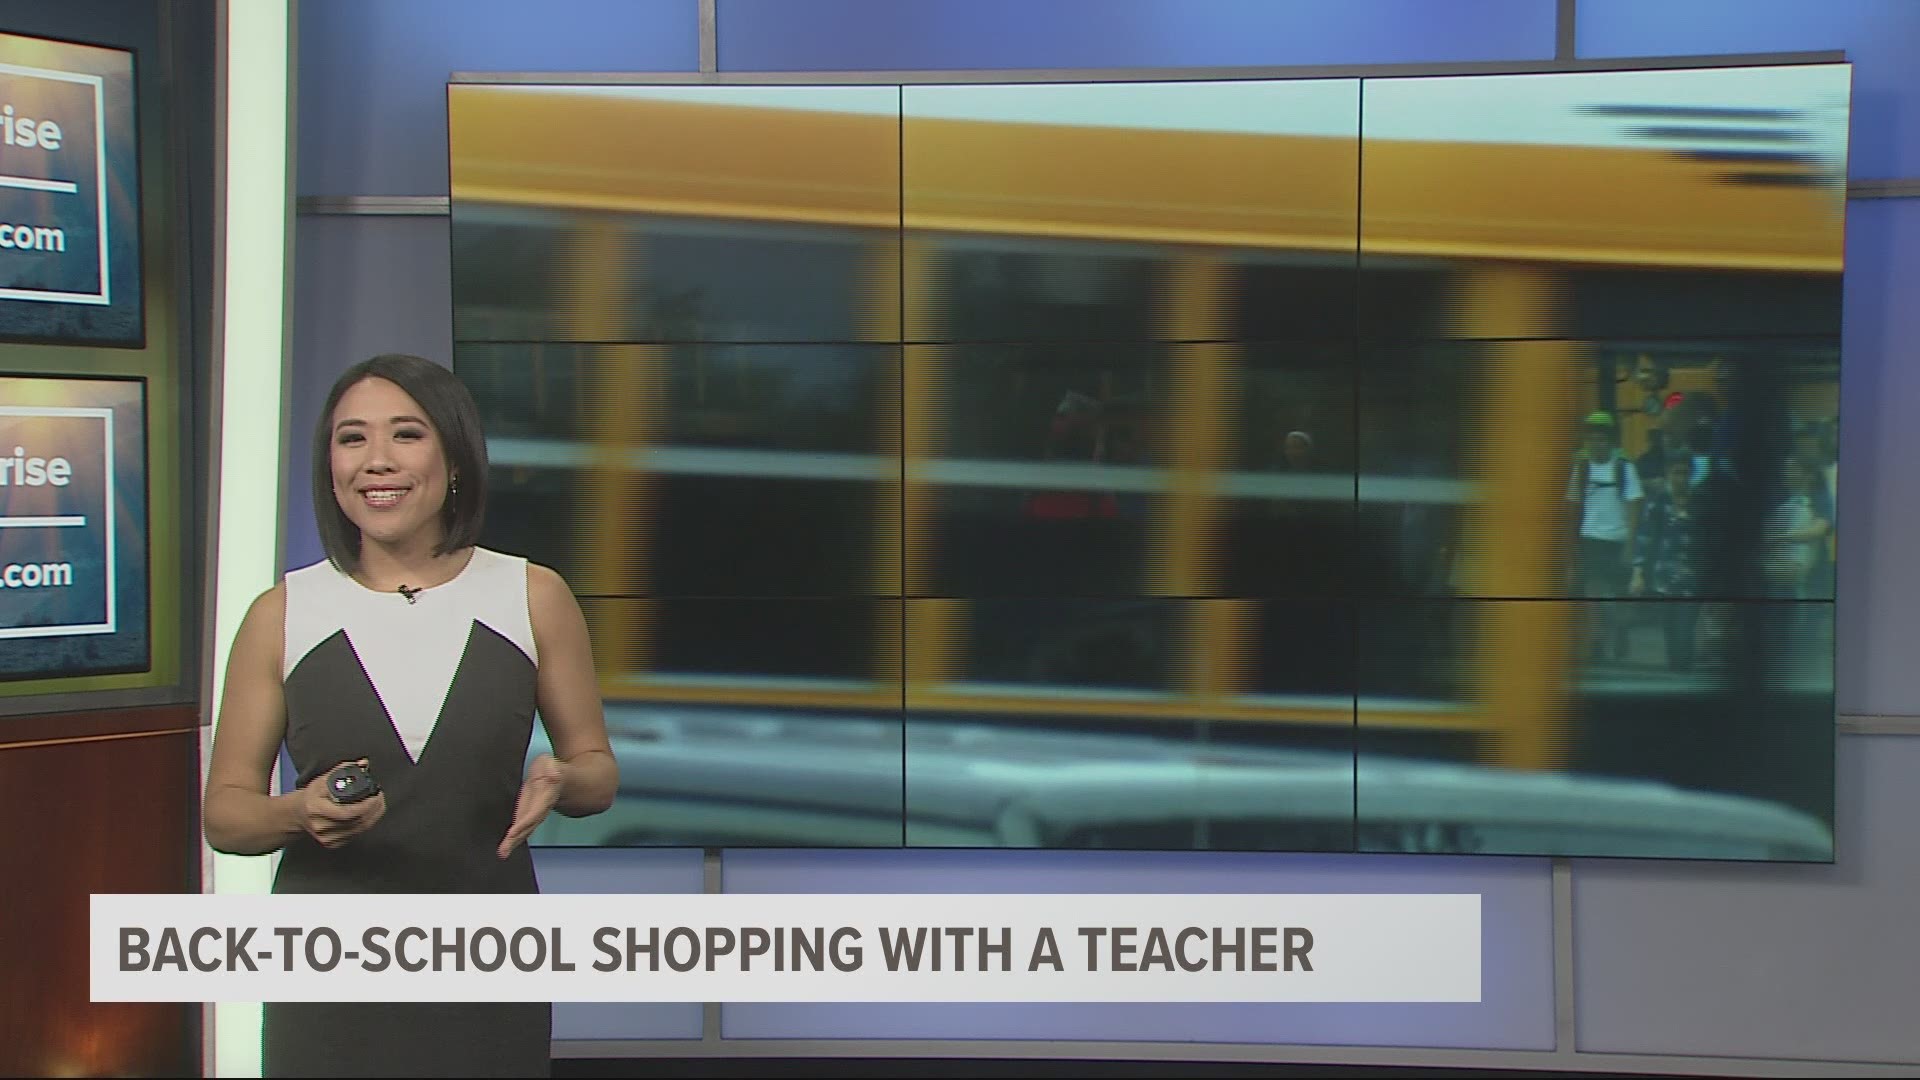 Back to school is on the brain for many parents and kids. Back-to-school supplies are flying off the shelves and teachers are preparing too. We followed one teacher on her school supply shopping trip and got the inside scoop on finding deals and what to buy.